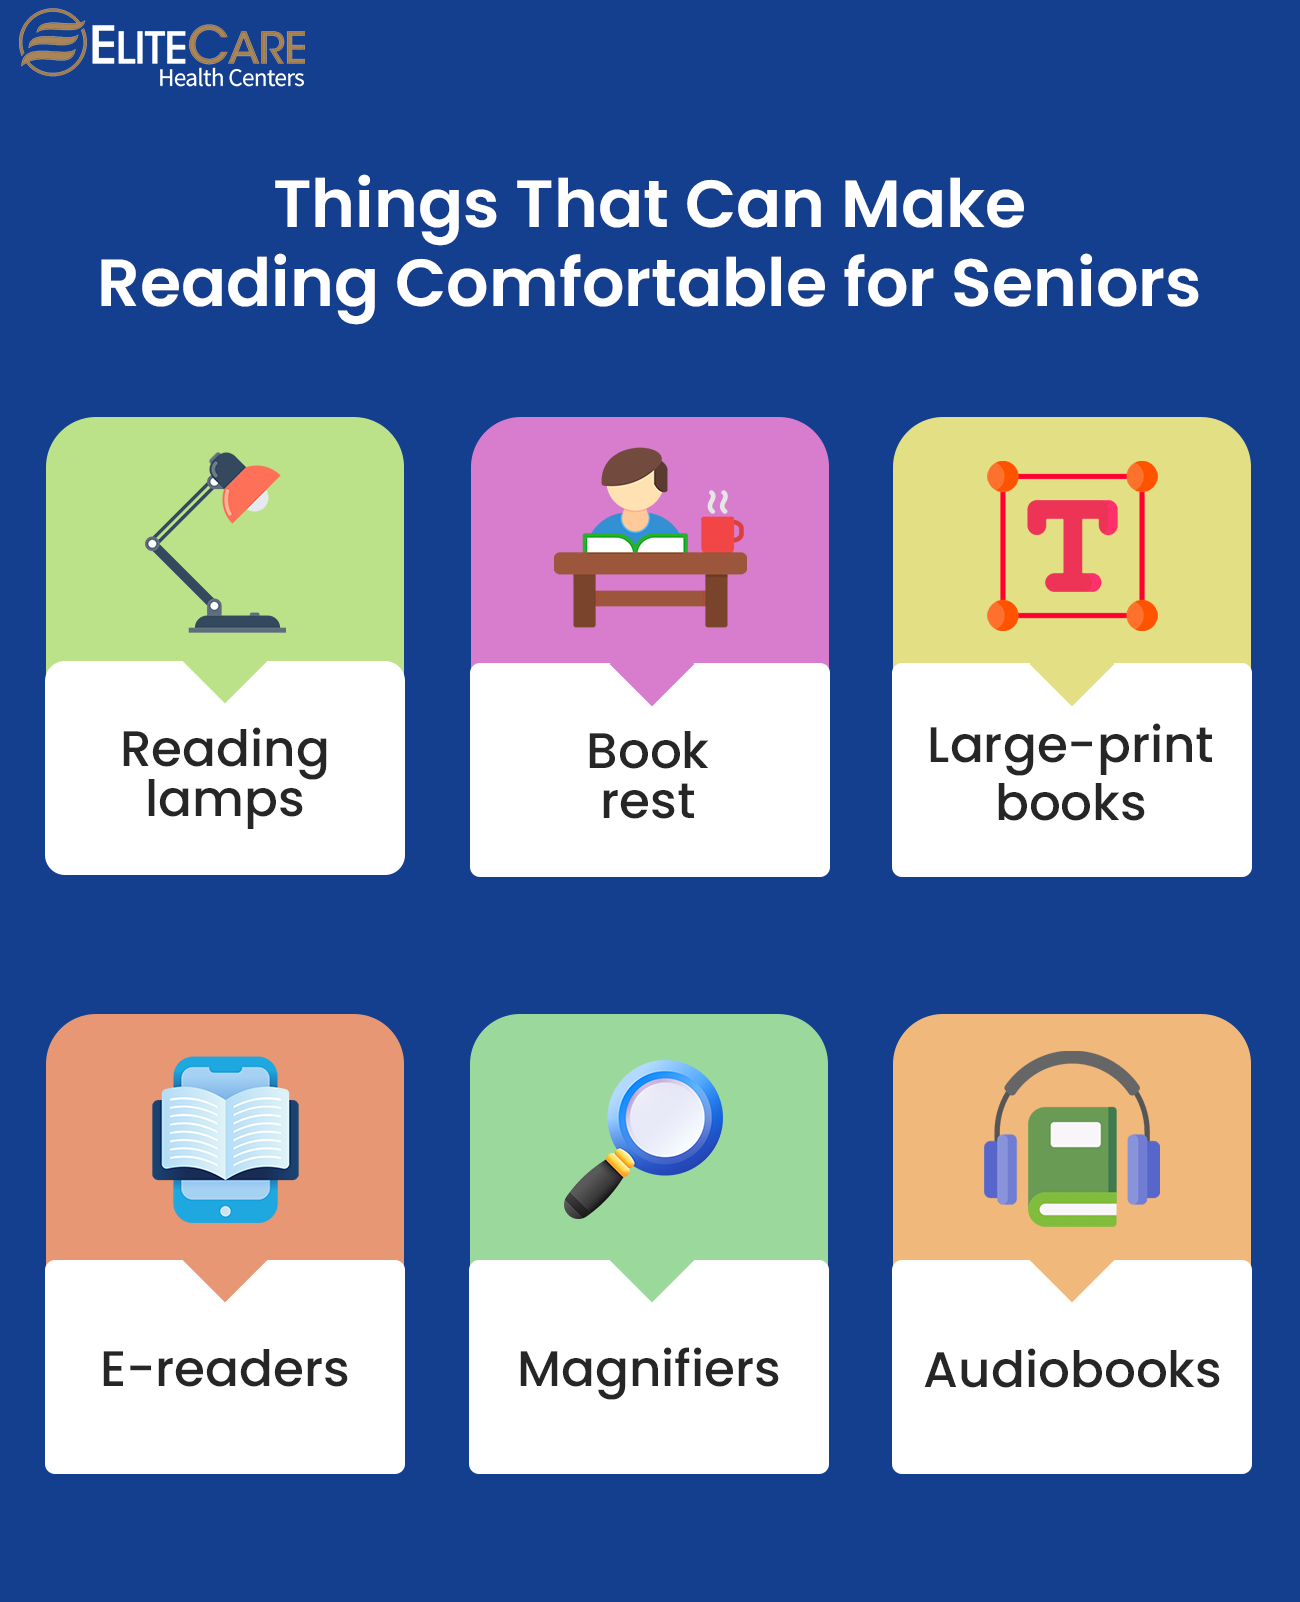 Things That Can Make Reading Comfortable for Seniors